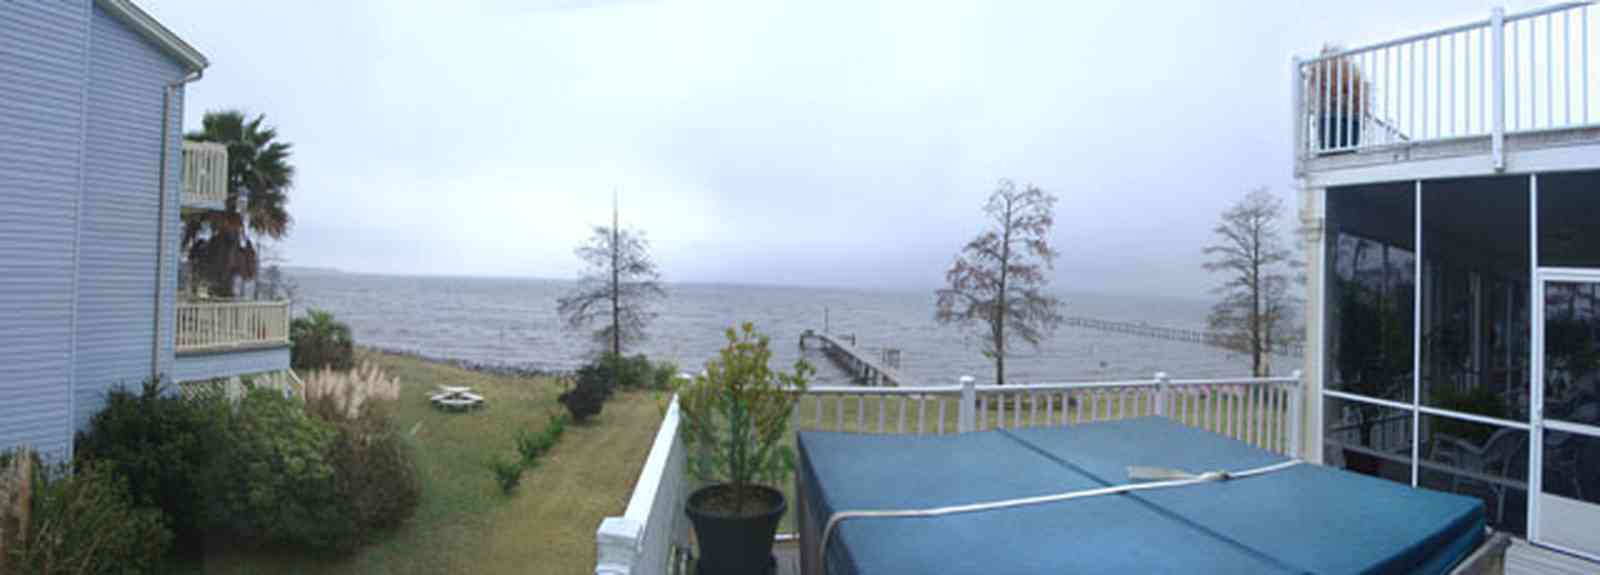 Pace:-Floridatown_04.jpg:  hot tub, screened porch,escambia bay